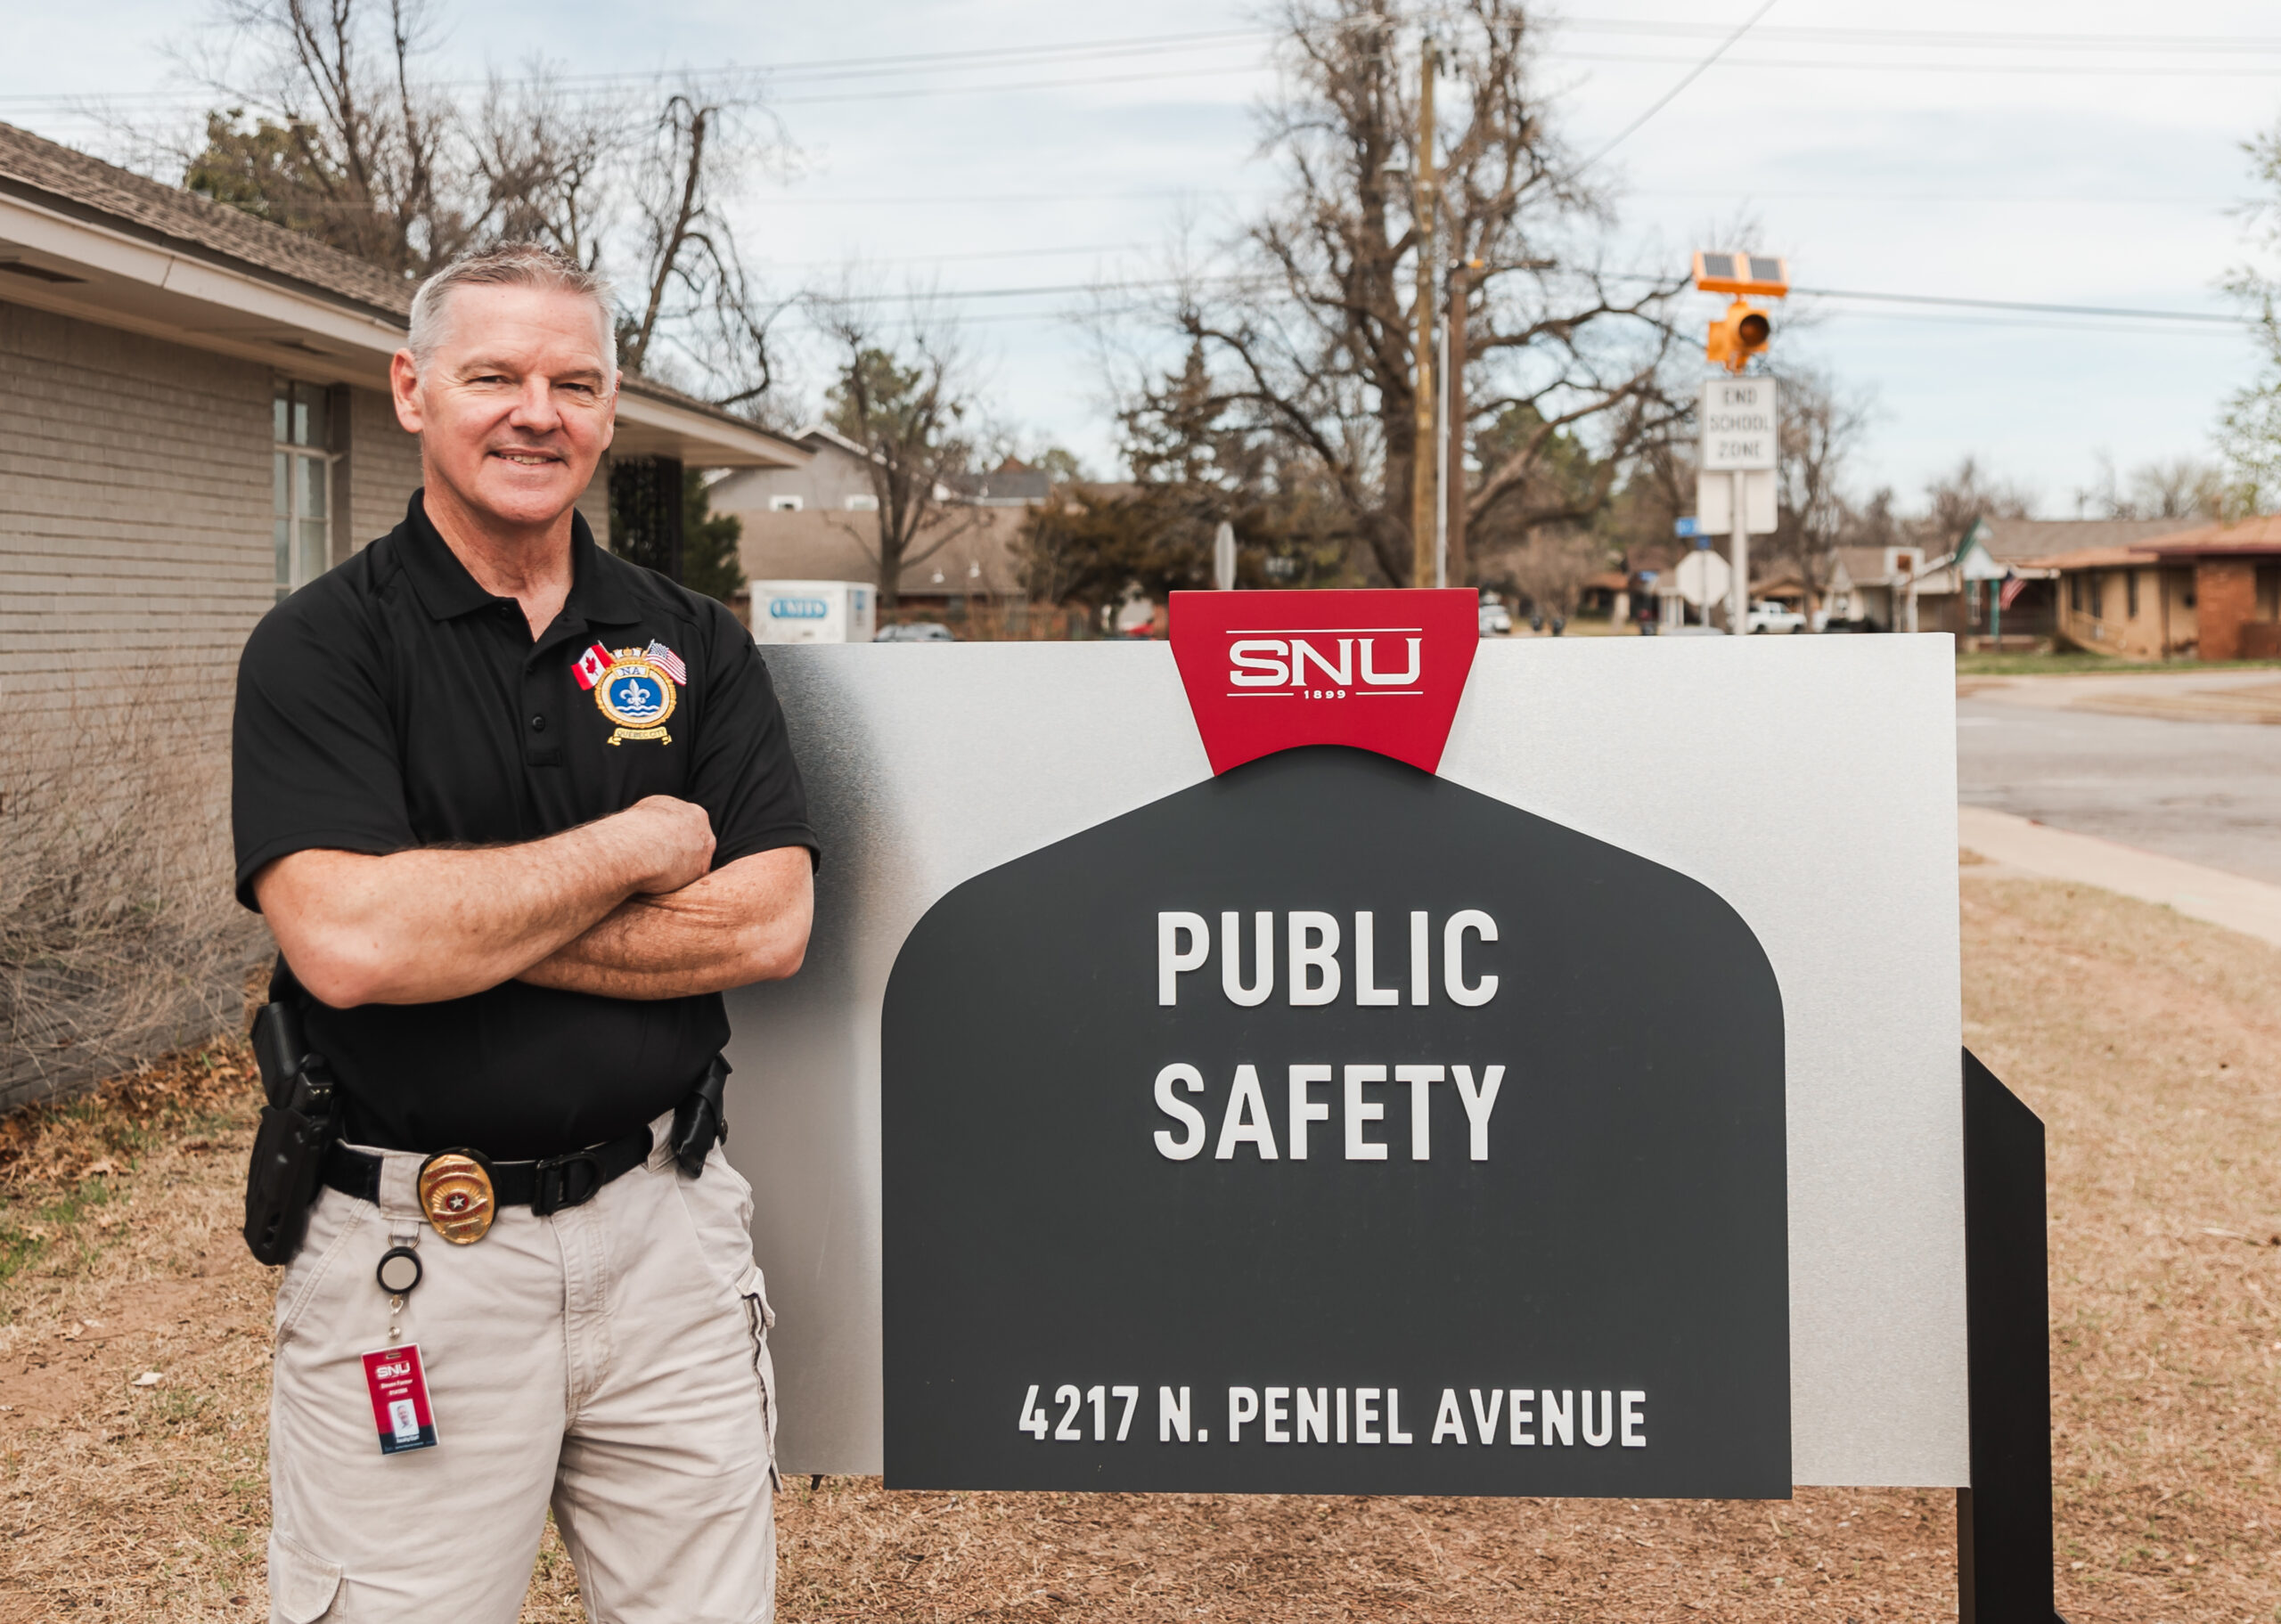 SNU Welcomes Steve Farmer- Director and Chief of Police